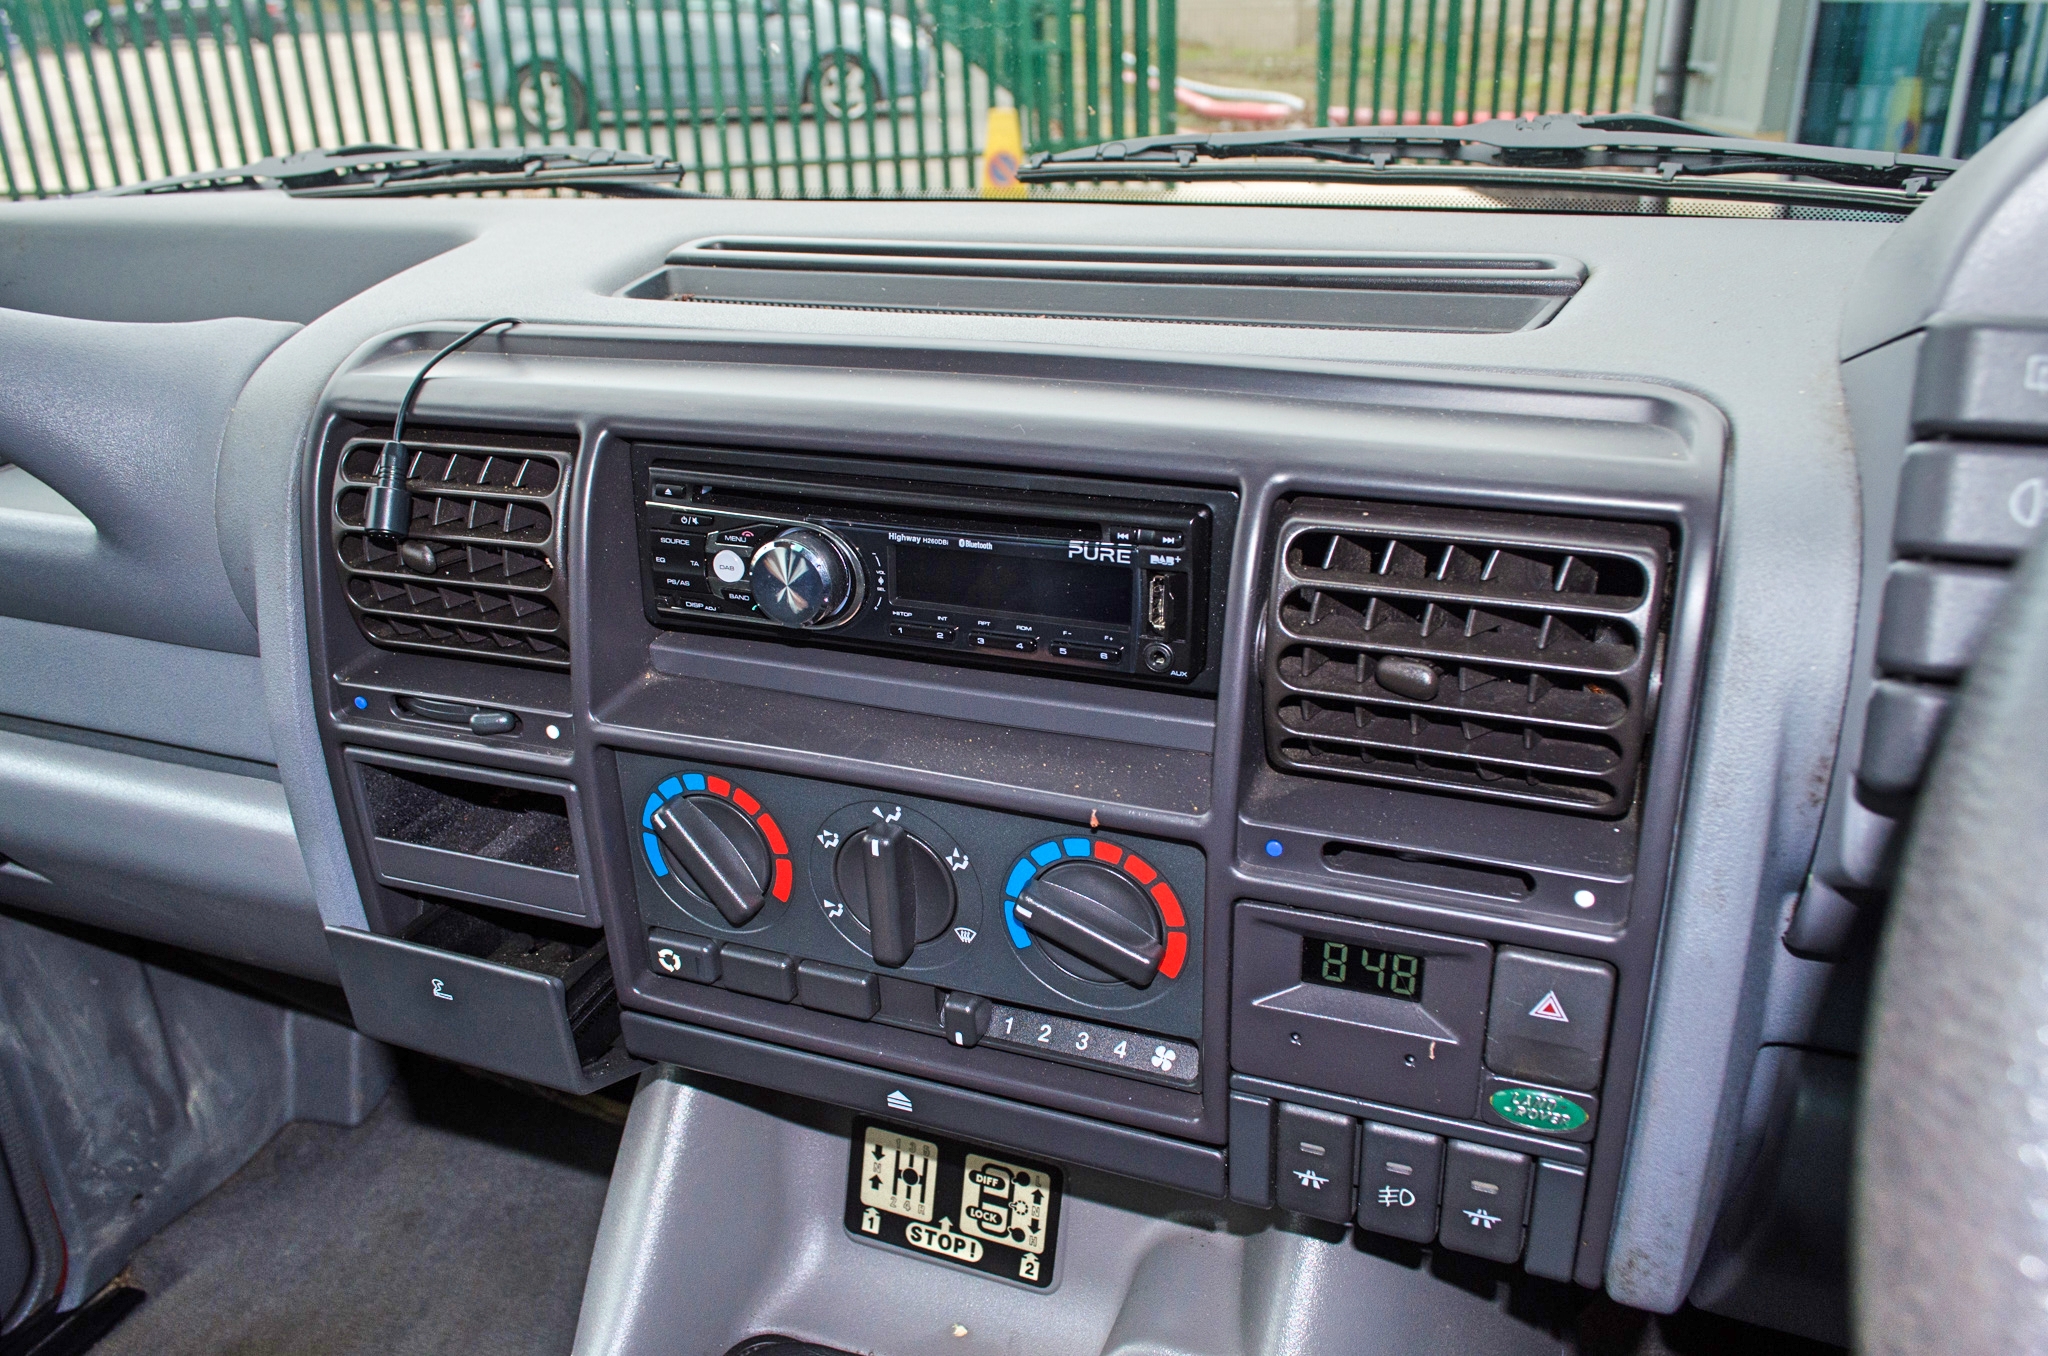 1998 Landrover Discovery 3.9 litre V8 manual 5 door 4wd - Image 36 of 46